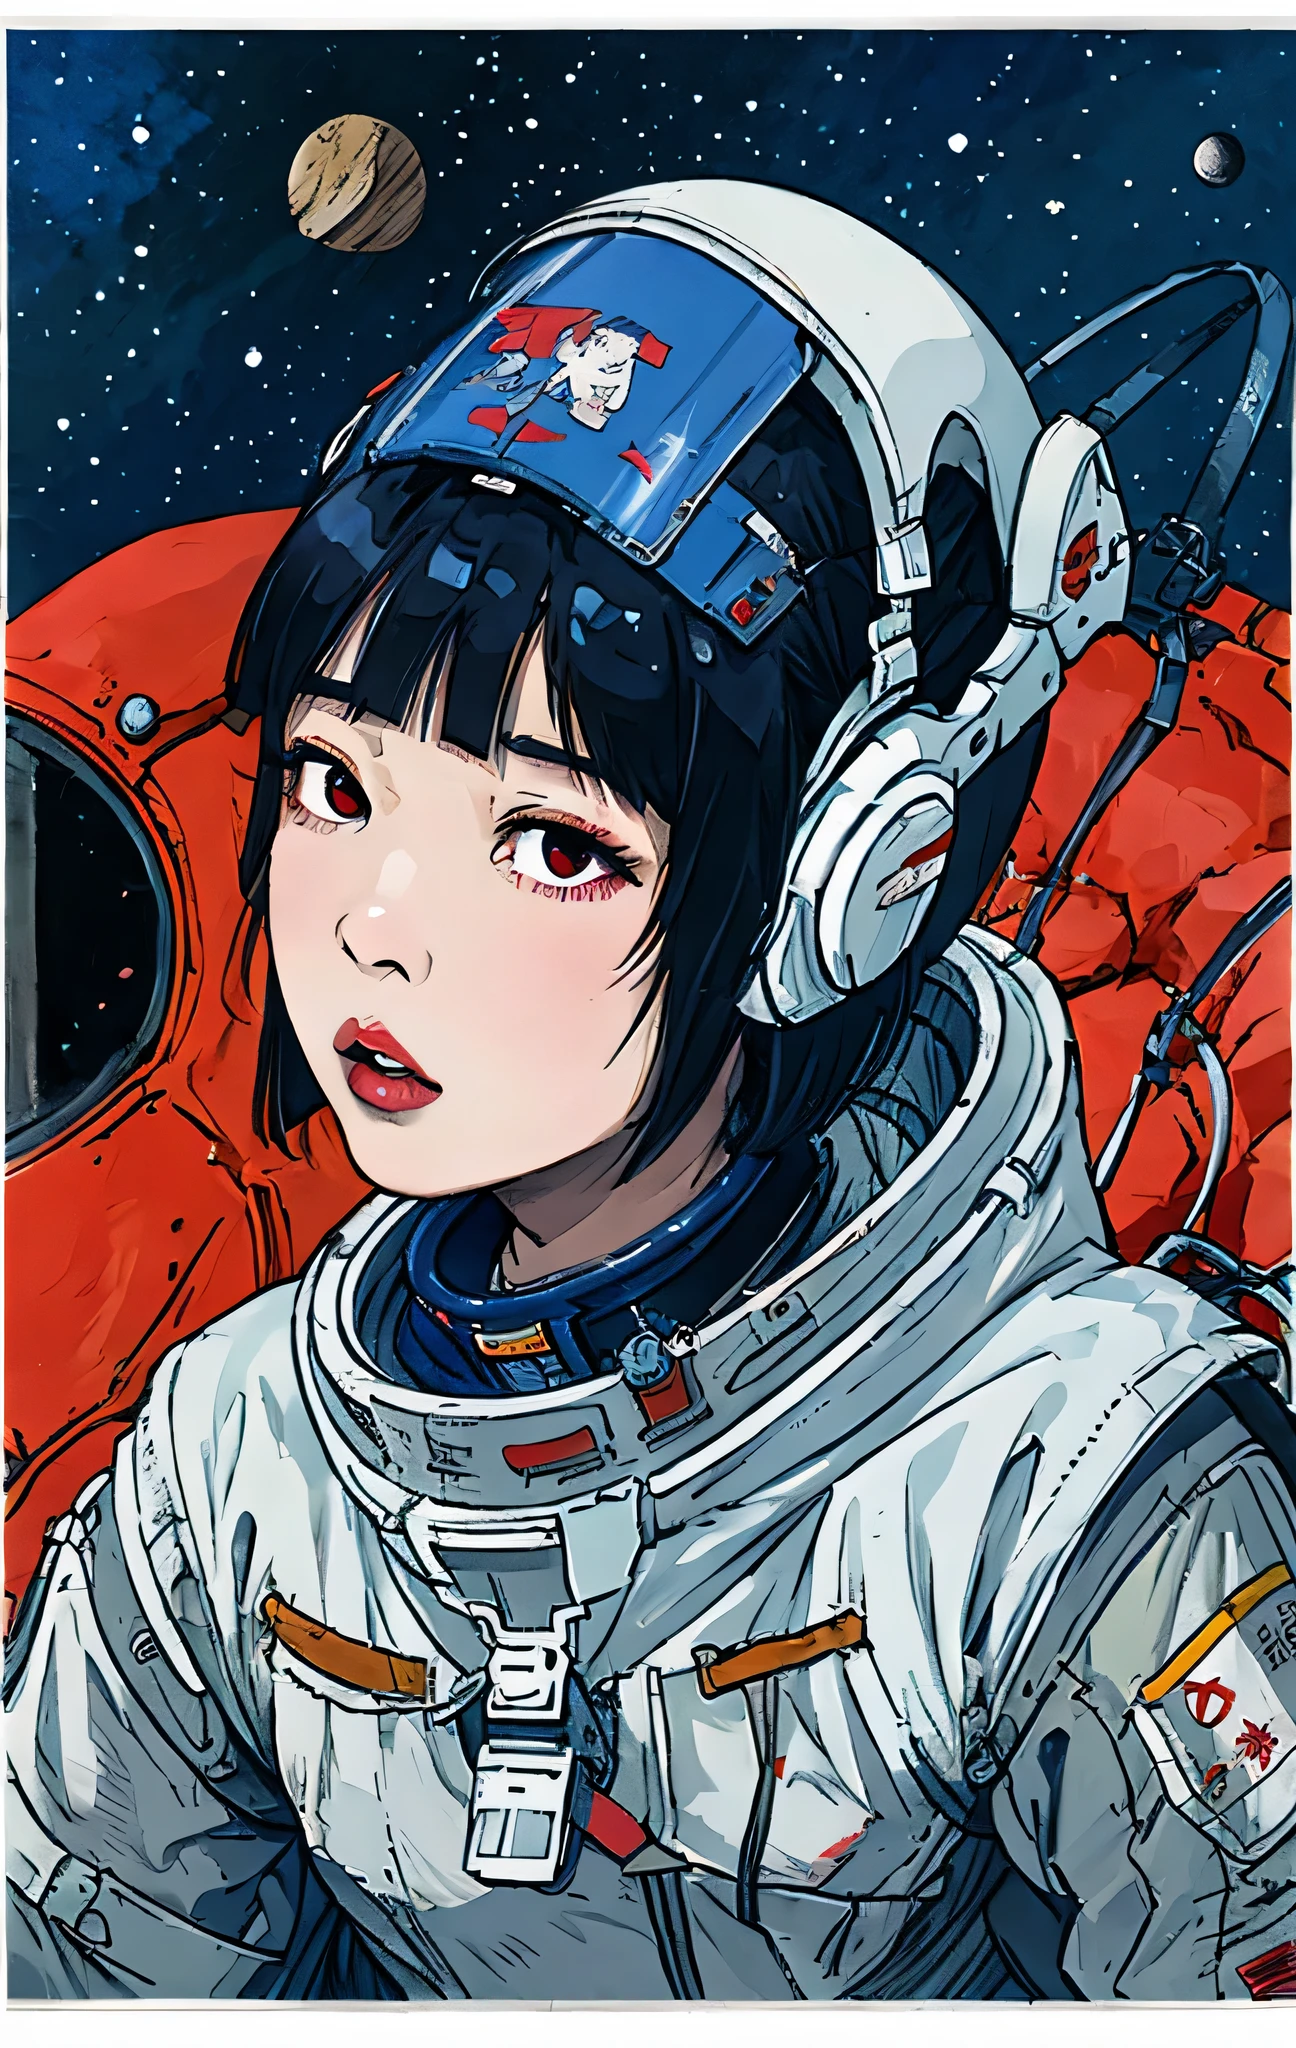 1 girl,flat_chest,cute,beautiful detailed eye,shiny hair,visible through hair,hairs between eye, Chinese Communist  Posters, sovietposter,red monochrome,soviet poster, soviet,Communism,
black_hair,red_eye,vampire,teenage,,Spacesuit:orange_clothing_body:Jumpsuit),white_gloves, white_space shoes, white_Helmet, the CCCP red letters on the top of Helmet, no gravity, side light, reflection, The person wearing the spacesuit is in the bottom left of the frame., The right hand is outstretched, My right hand gently touches the Salyut space station.), Space station on the top right of the screen, Reflection from the sun, silver metal,red flag, shine,ussr style, diffuse reflection, metallic texture, The vista is a blue Earth,mecha style,Sea of stars,Treble, growing up、Ukiyo-e style background、、bondage、female orgasm、she&#39;Orgasm and loss of control.